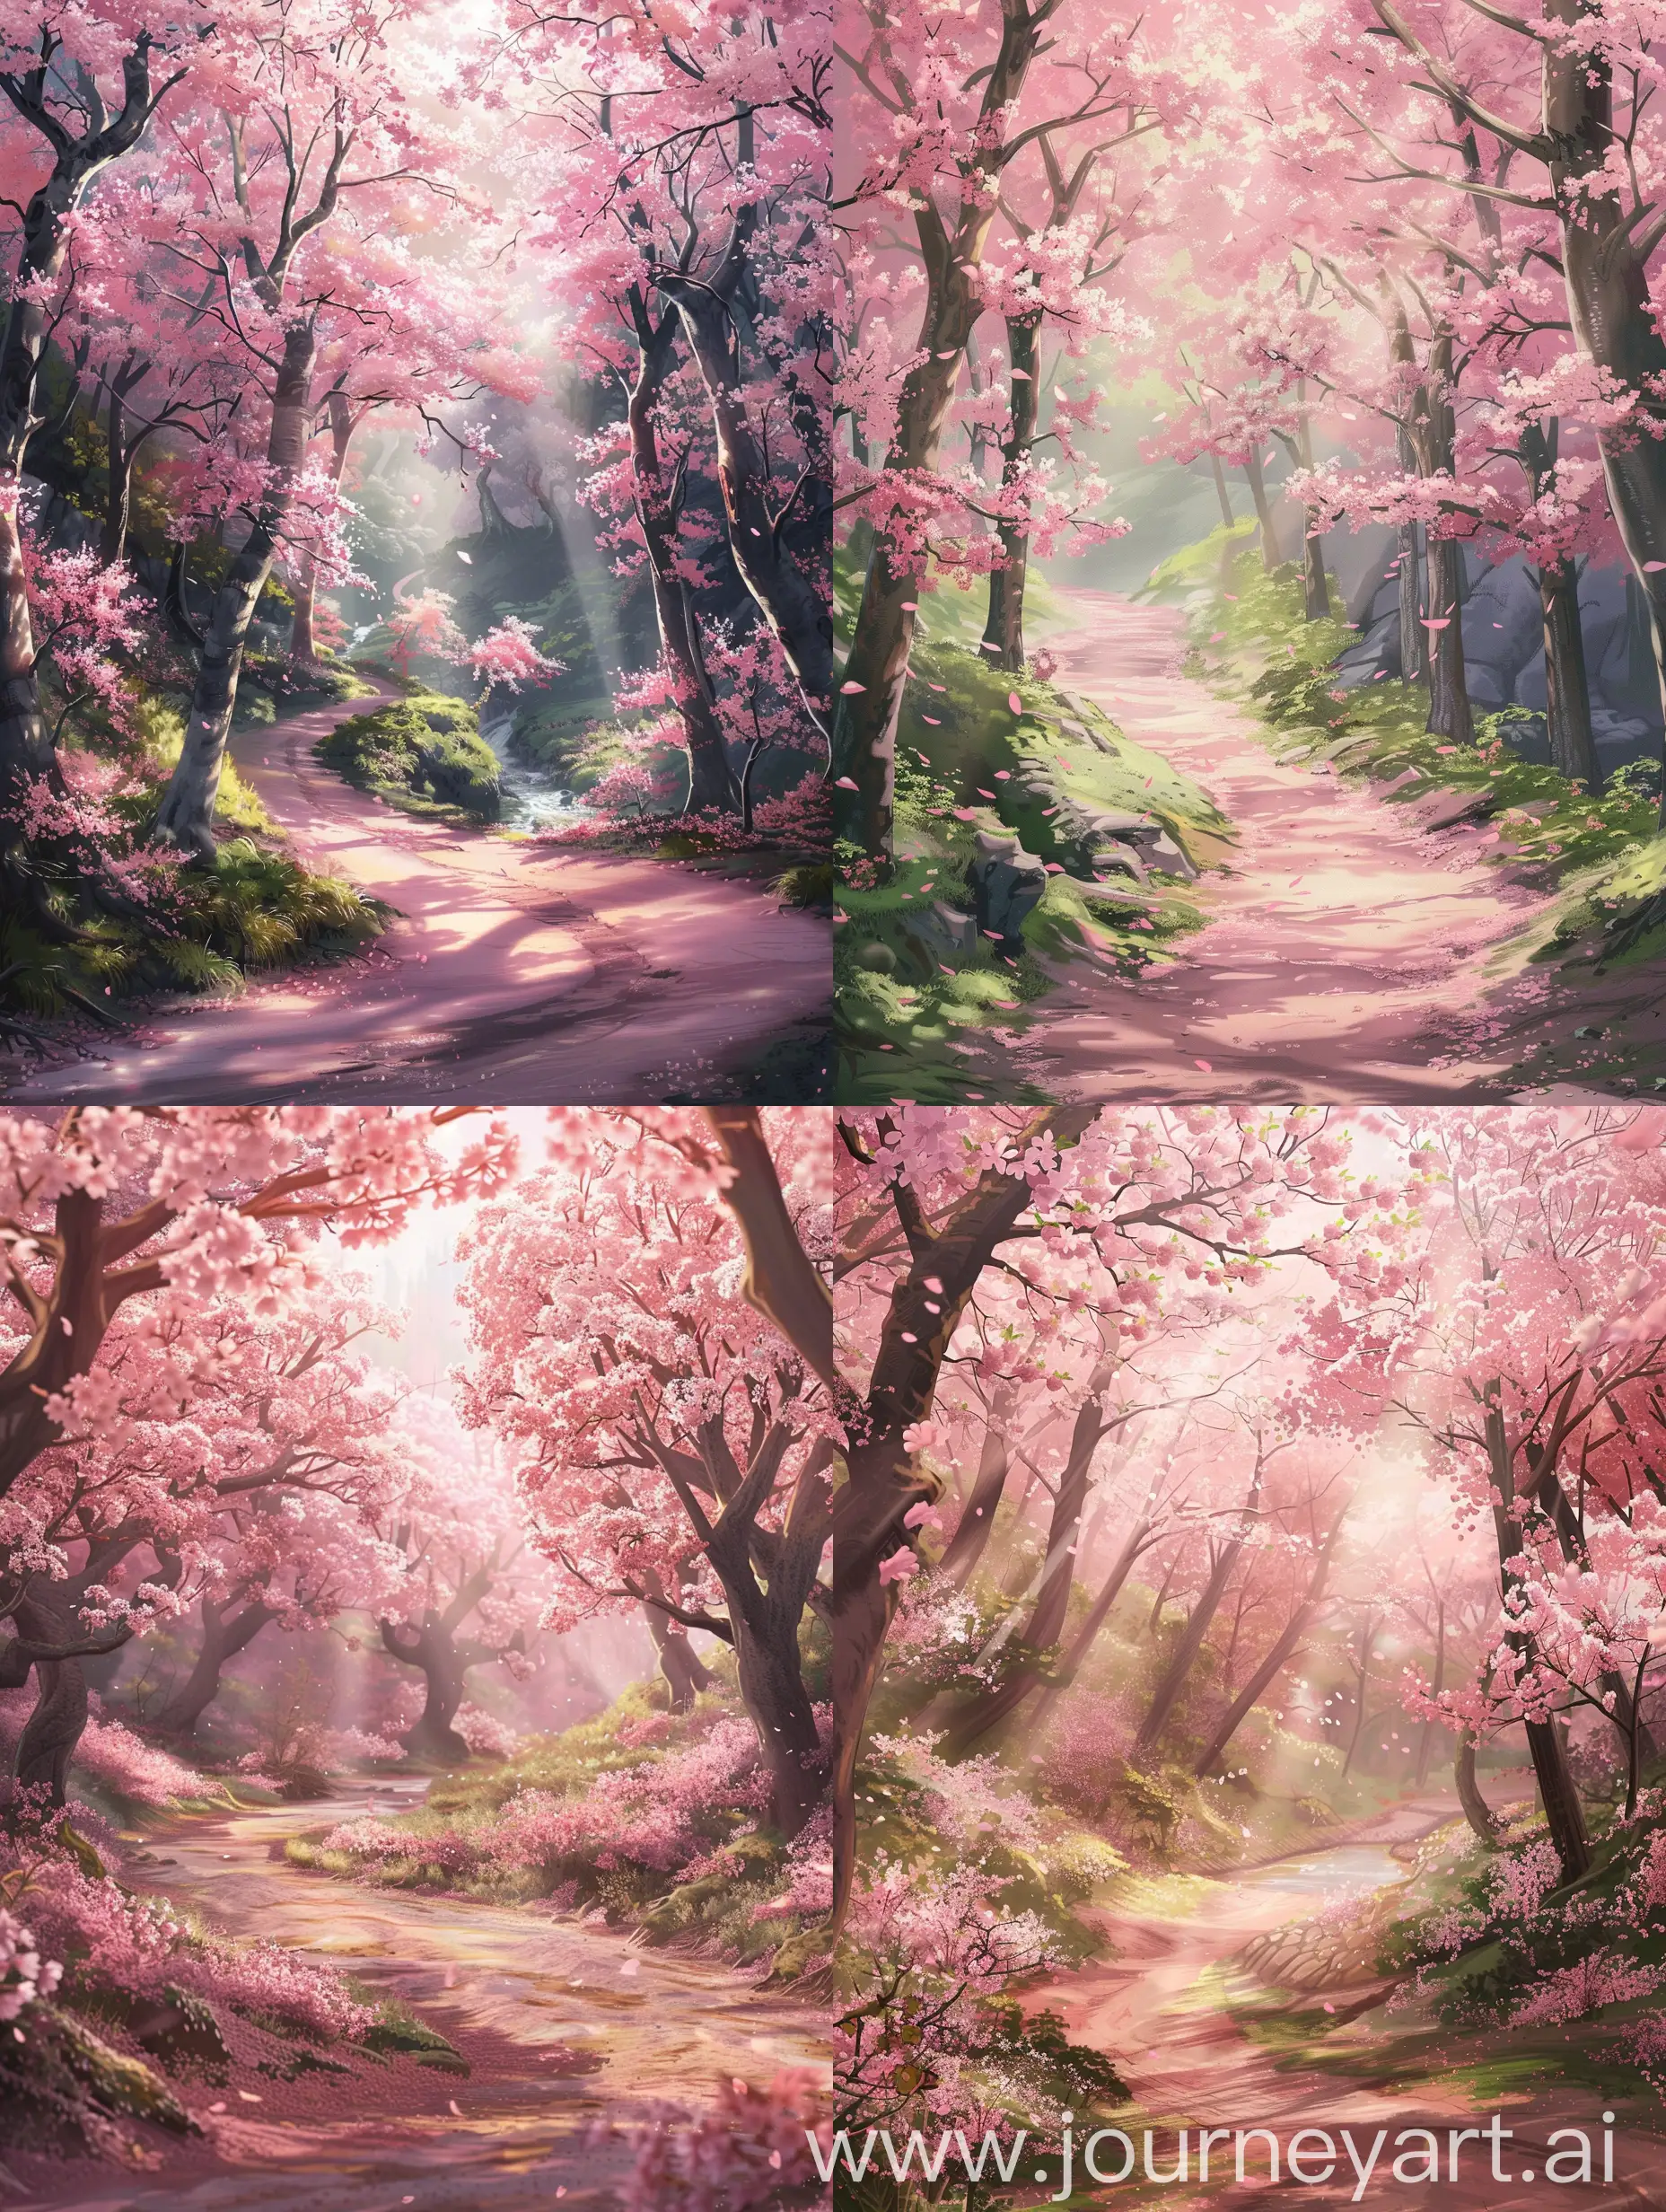 "Generate an anime scenery in Studio Ghibli art style featuring a picturesque cherry blossom forest. The scene should showcase the delicate pink cherry blossoms in full bloom, with sunlight filtering through the trees to create a serene atmosphere. Include a winding path and perhaps a gentle stream, surrounded by the ethereal beauty of the blossoms. Capture the enchanting and whimsical essence of Studio Ghibli's artistry, paying attention to the soft colors, detailed surroundings, and a sense of tranquility that characterizes their magical worlds."




